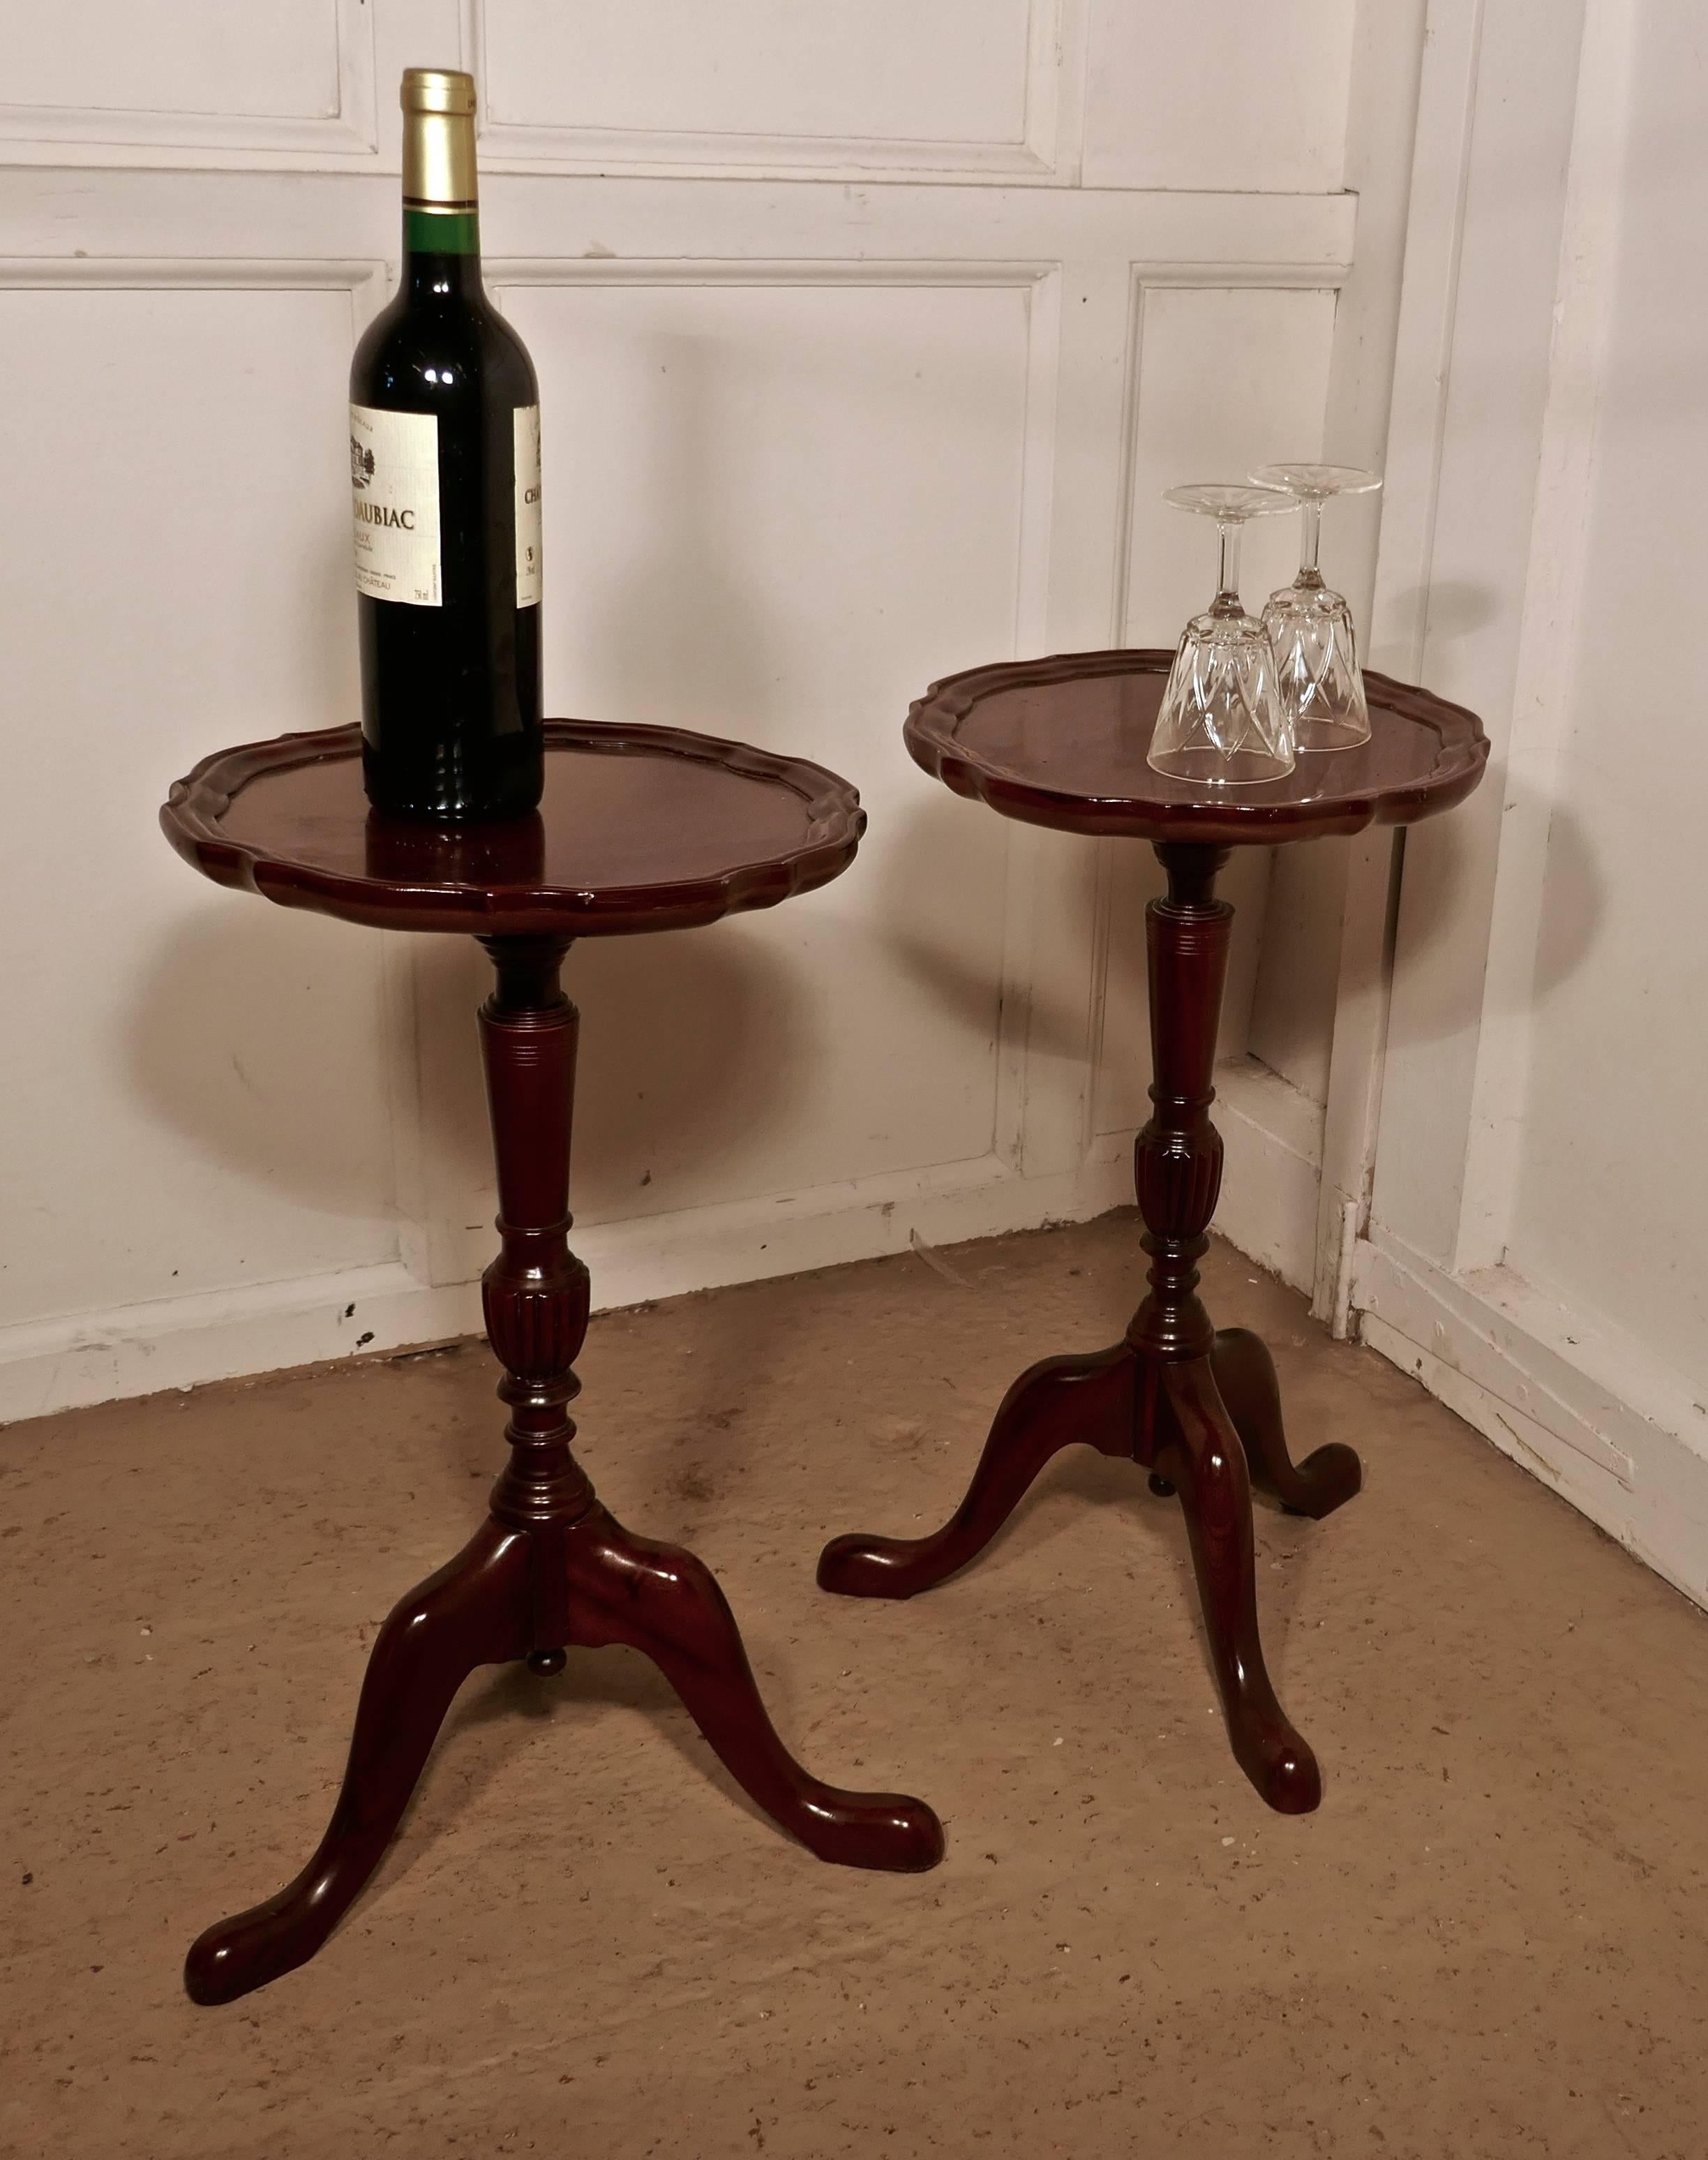 This is a very attractive pair of mahogany wine tables, they stand on a slender baluster three footed leg and they have a scalloped piecrust moulding around the edge of the tabletop 
The table are in good condition for their age and they have a